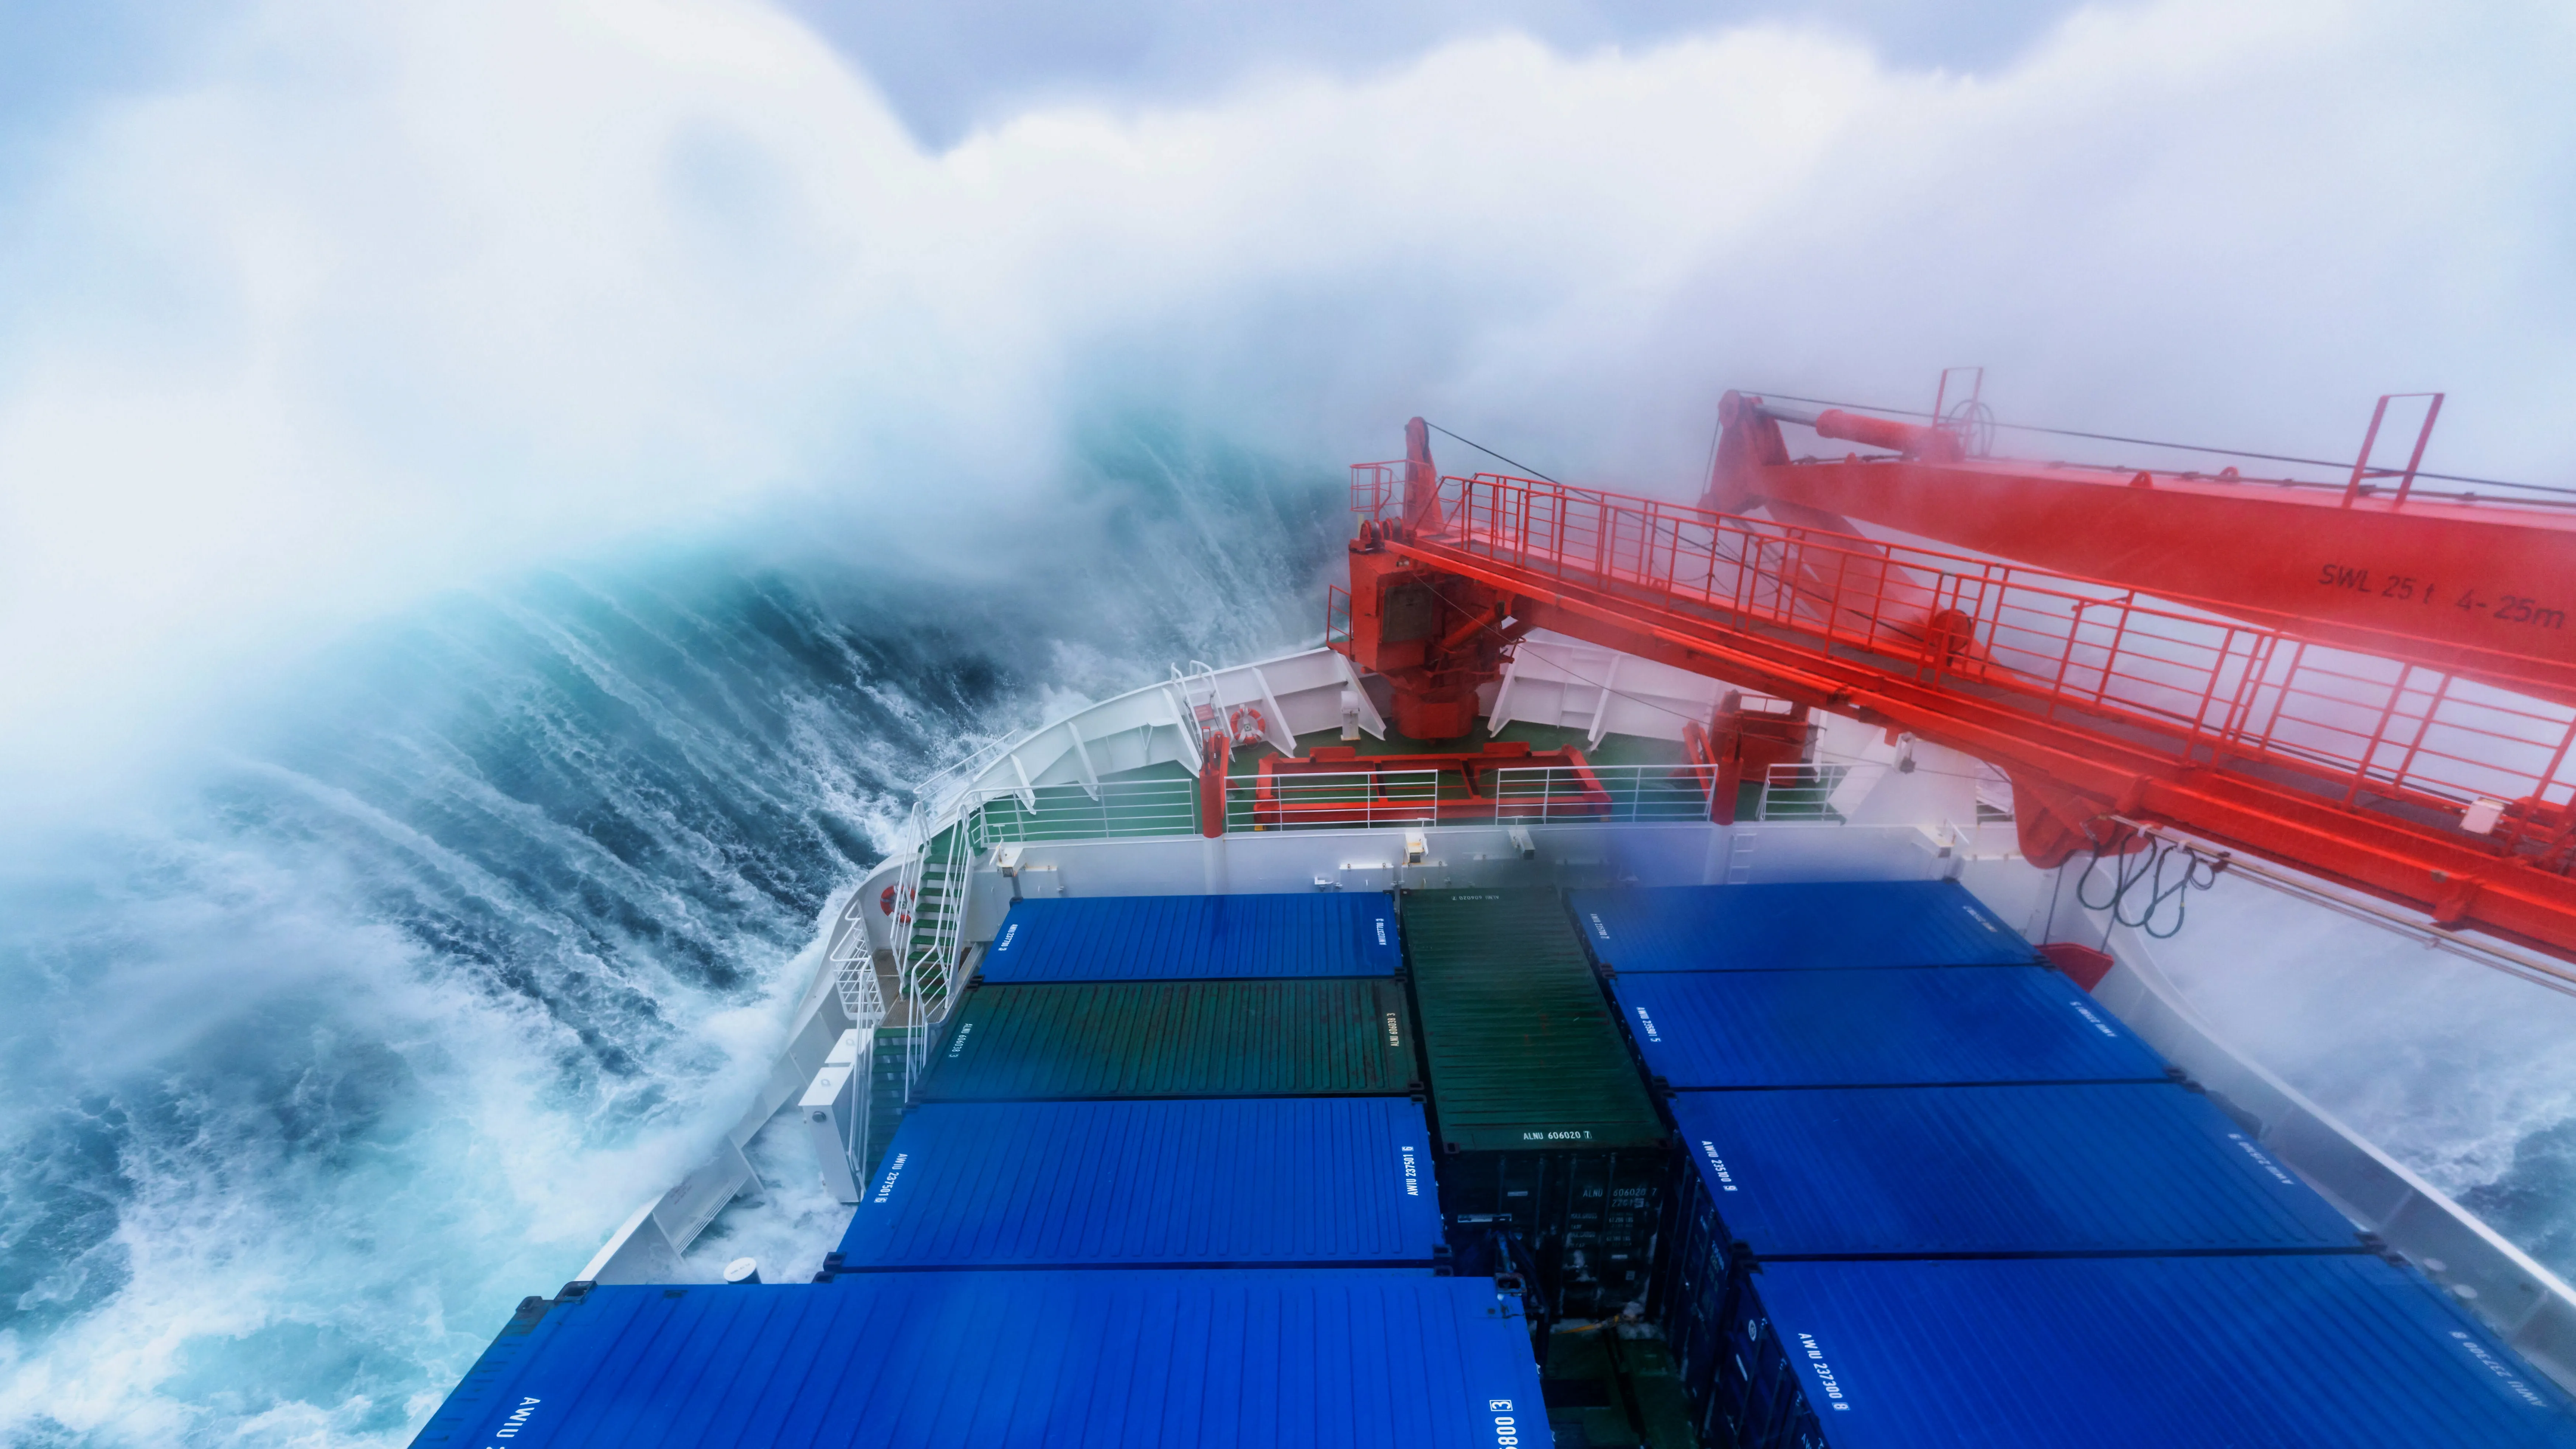 Viewed from the bridge, the bow of a ship smashes into a huge wave, sending streaks of spray away on both sides